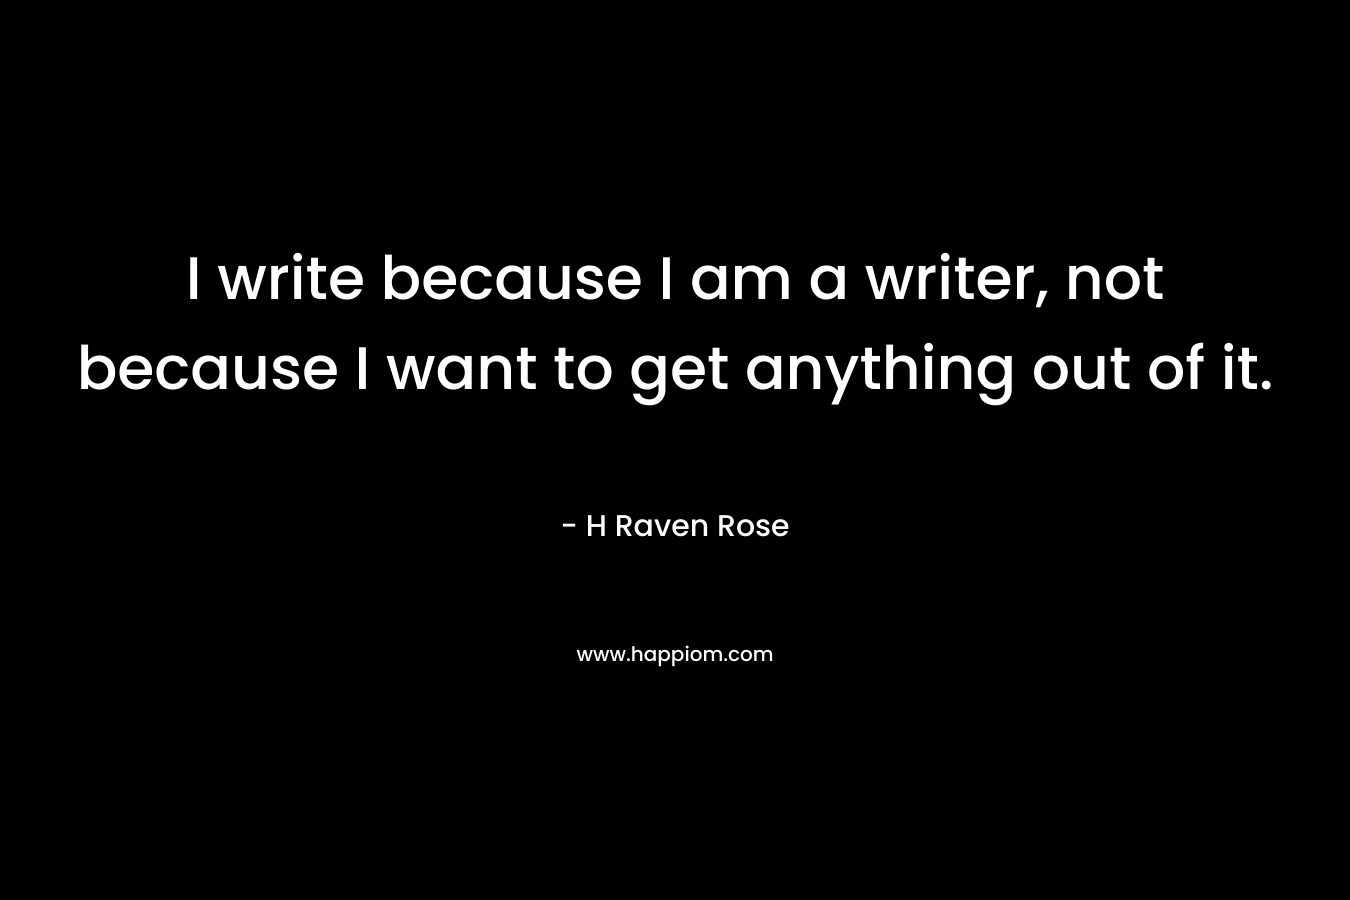 I write because I am a writer, not because I want to get anything out of it. – H Raven Rose